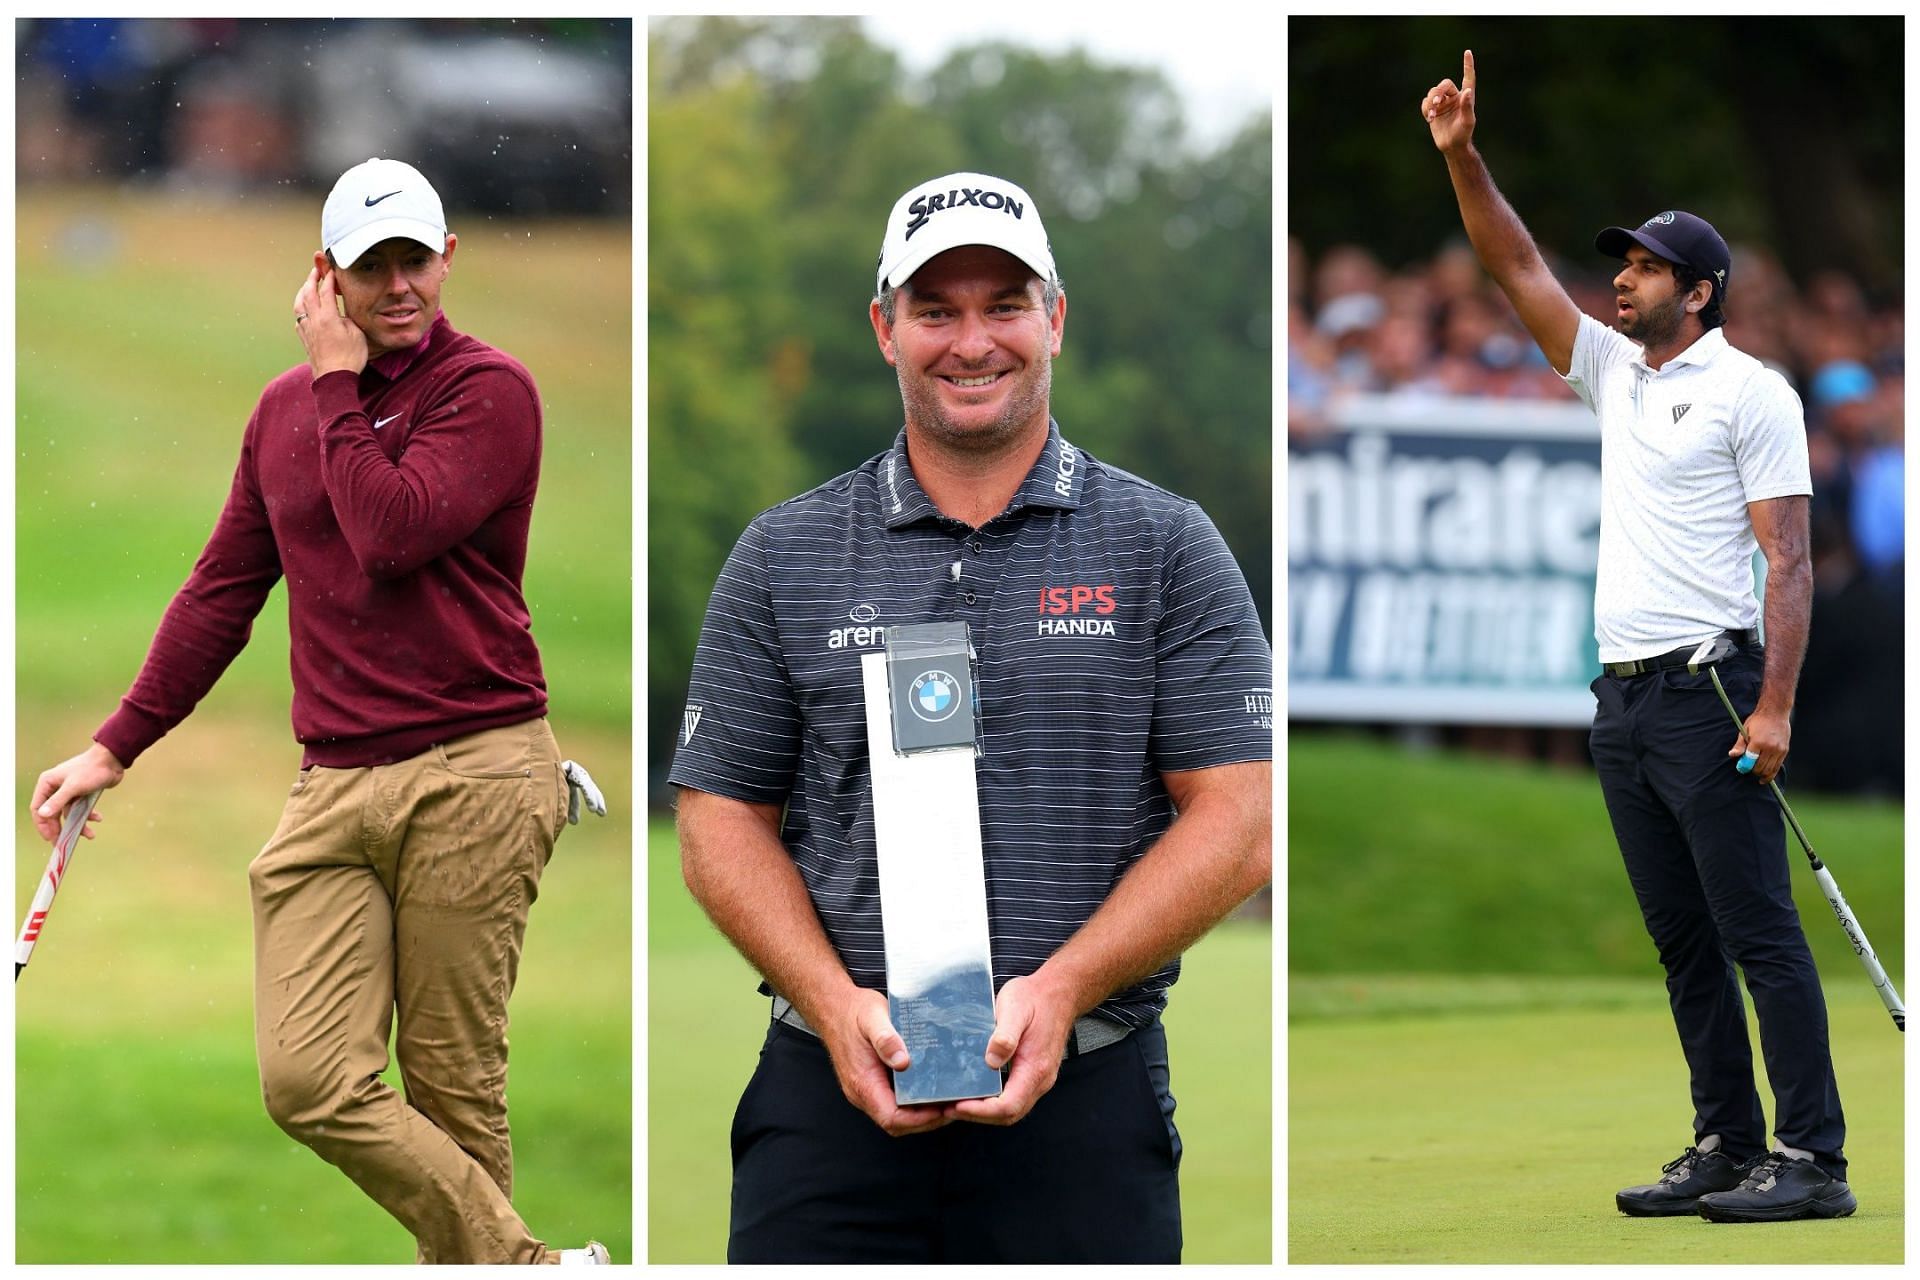 The BMW PGA Championship witnessed some surprise performances this year